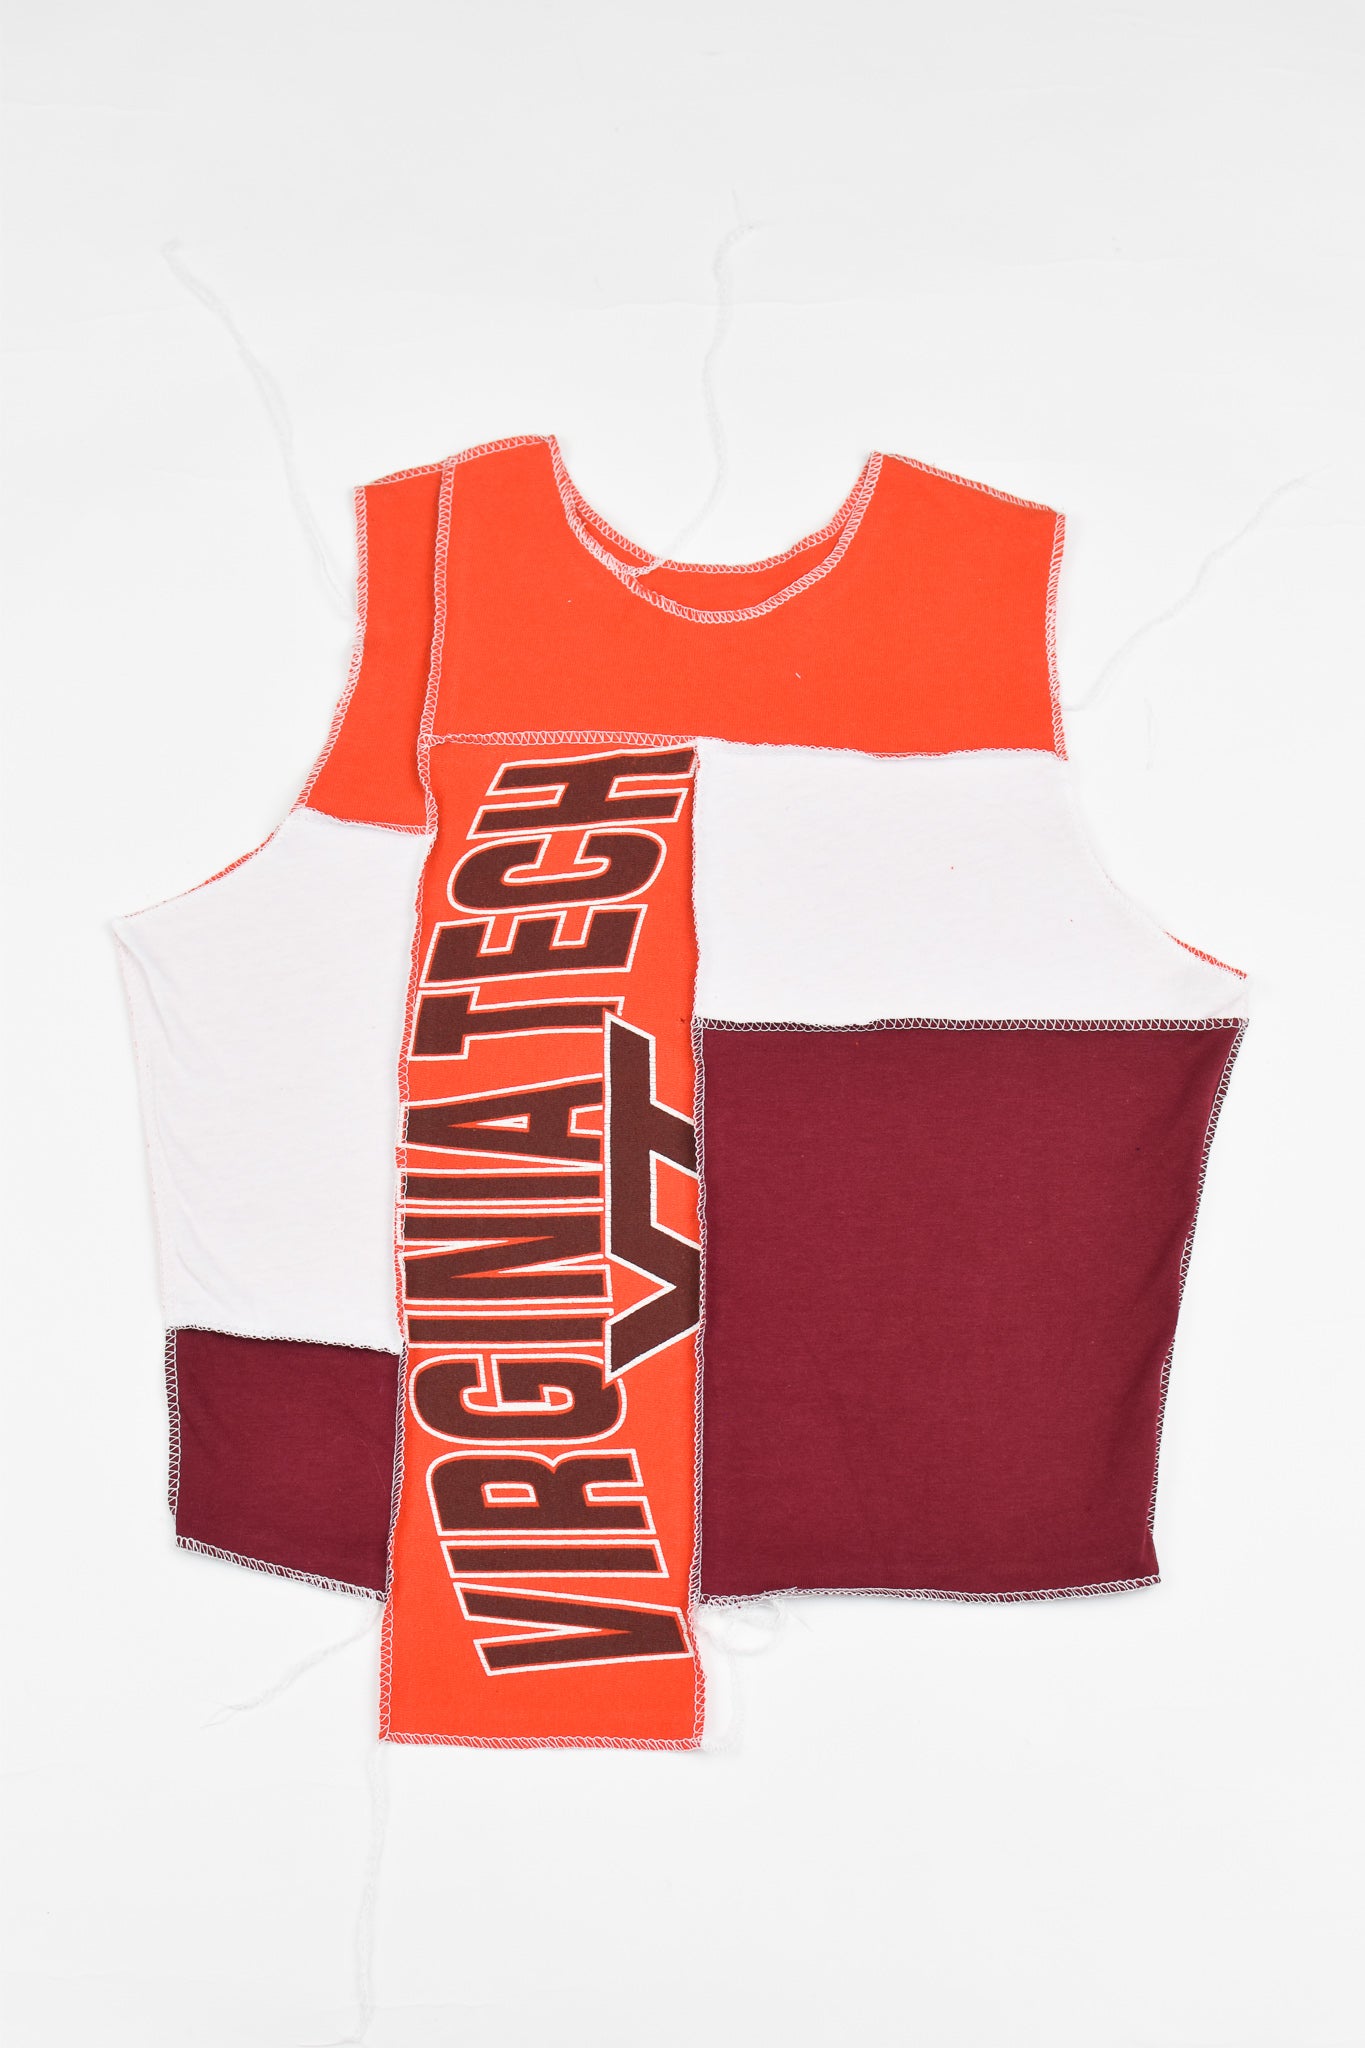 Upcycled Virginia Tech Scrappy Tank Top